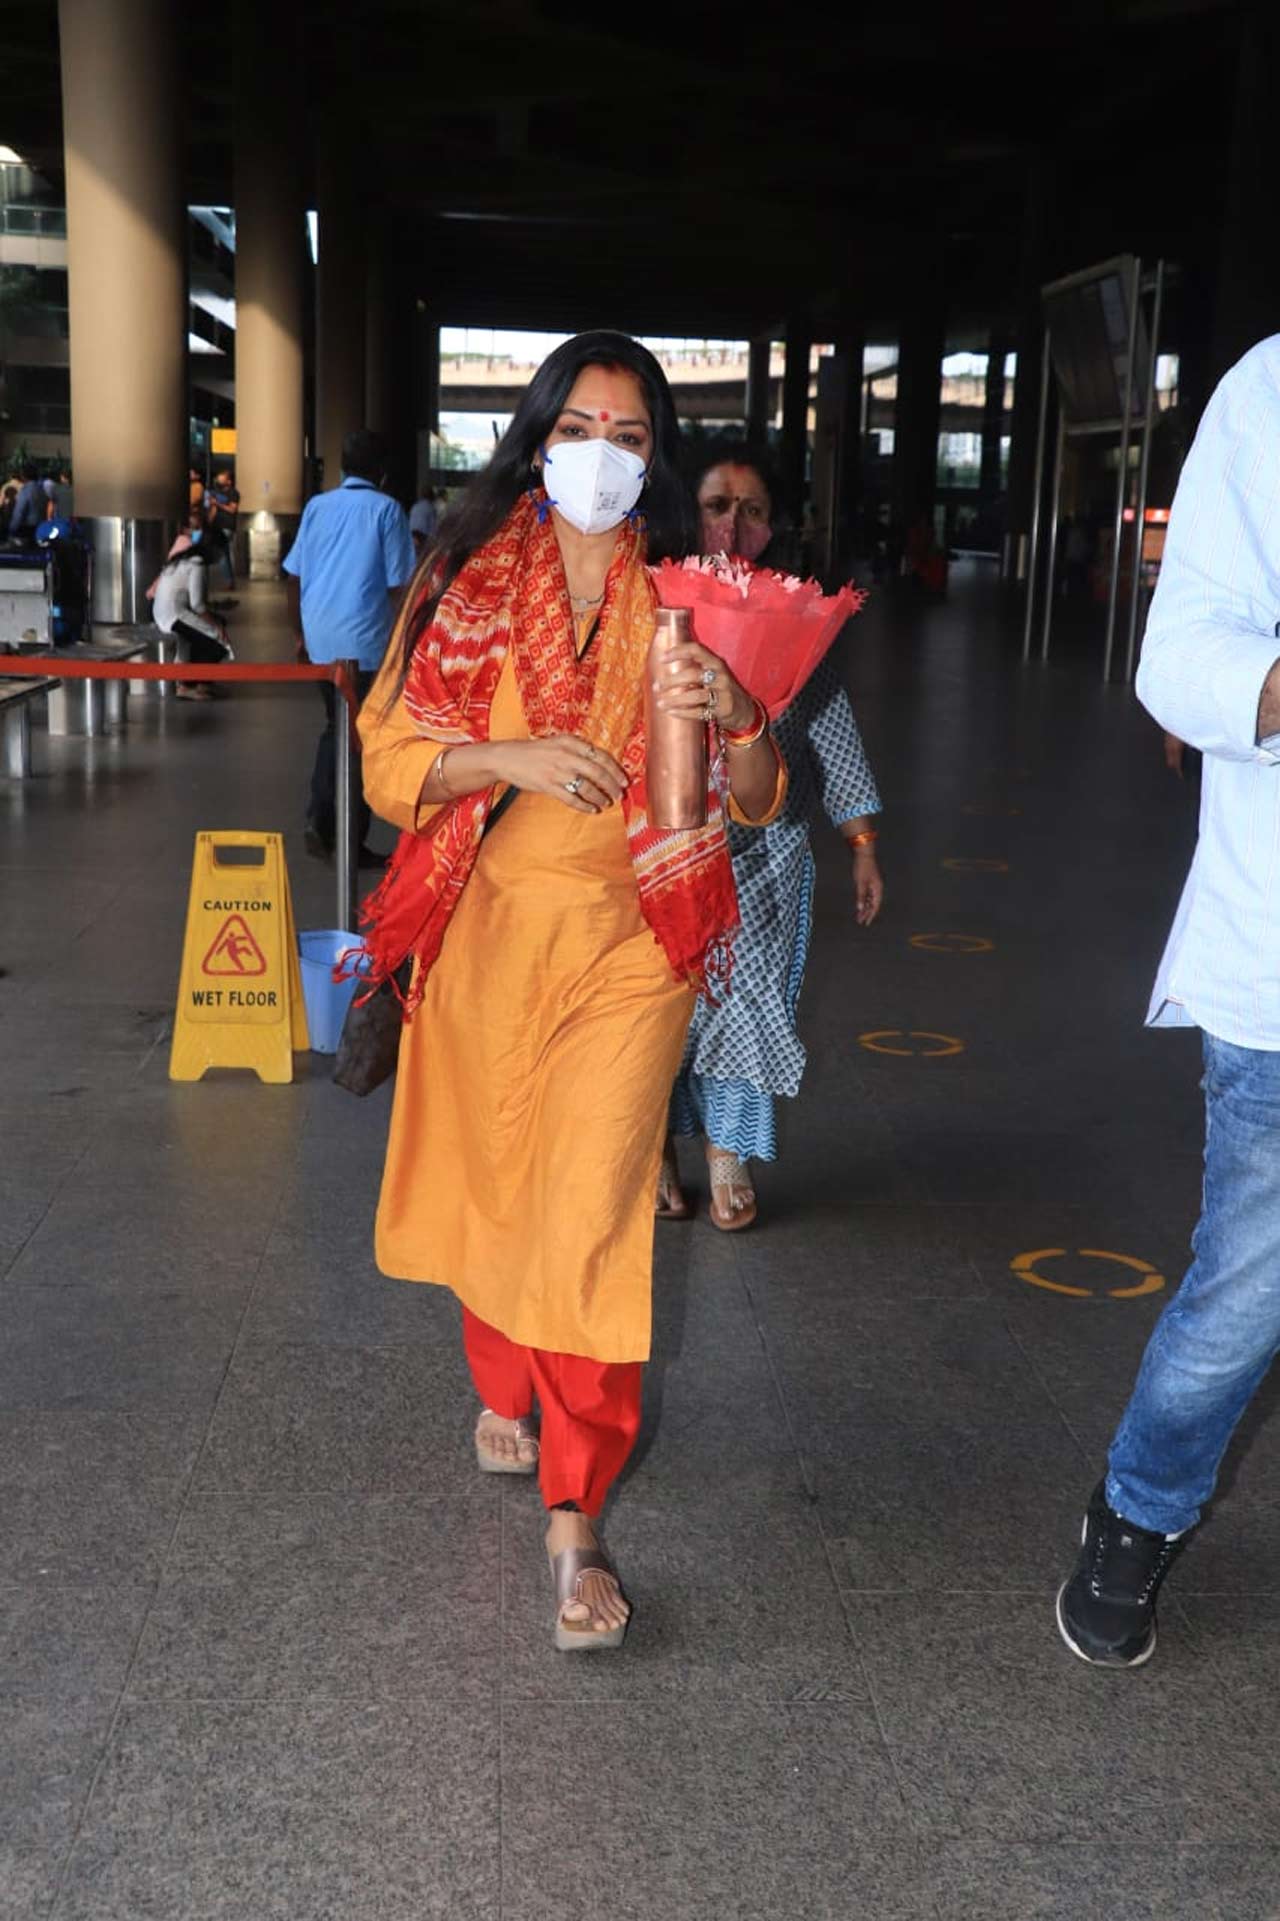 Rupali Ganguly, popularly known for her stint in 'Anupamaa' was all smiles when snapped at the Mumbai airport. Speaking about the show, 'Anupamaa' features Sudhanshu Pandey, Rupali Ganguly, Madalsa Sharma, Alpana Buch, Arvind Vaidya, Paras Kalnawat, Aashish Mehrotra, Muskan Bamne, Shekhar Shukla, Nidhi Shah, Anagha Bhosale, and Tassnim Sheikh.